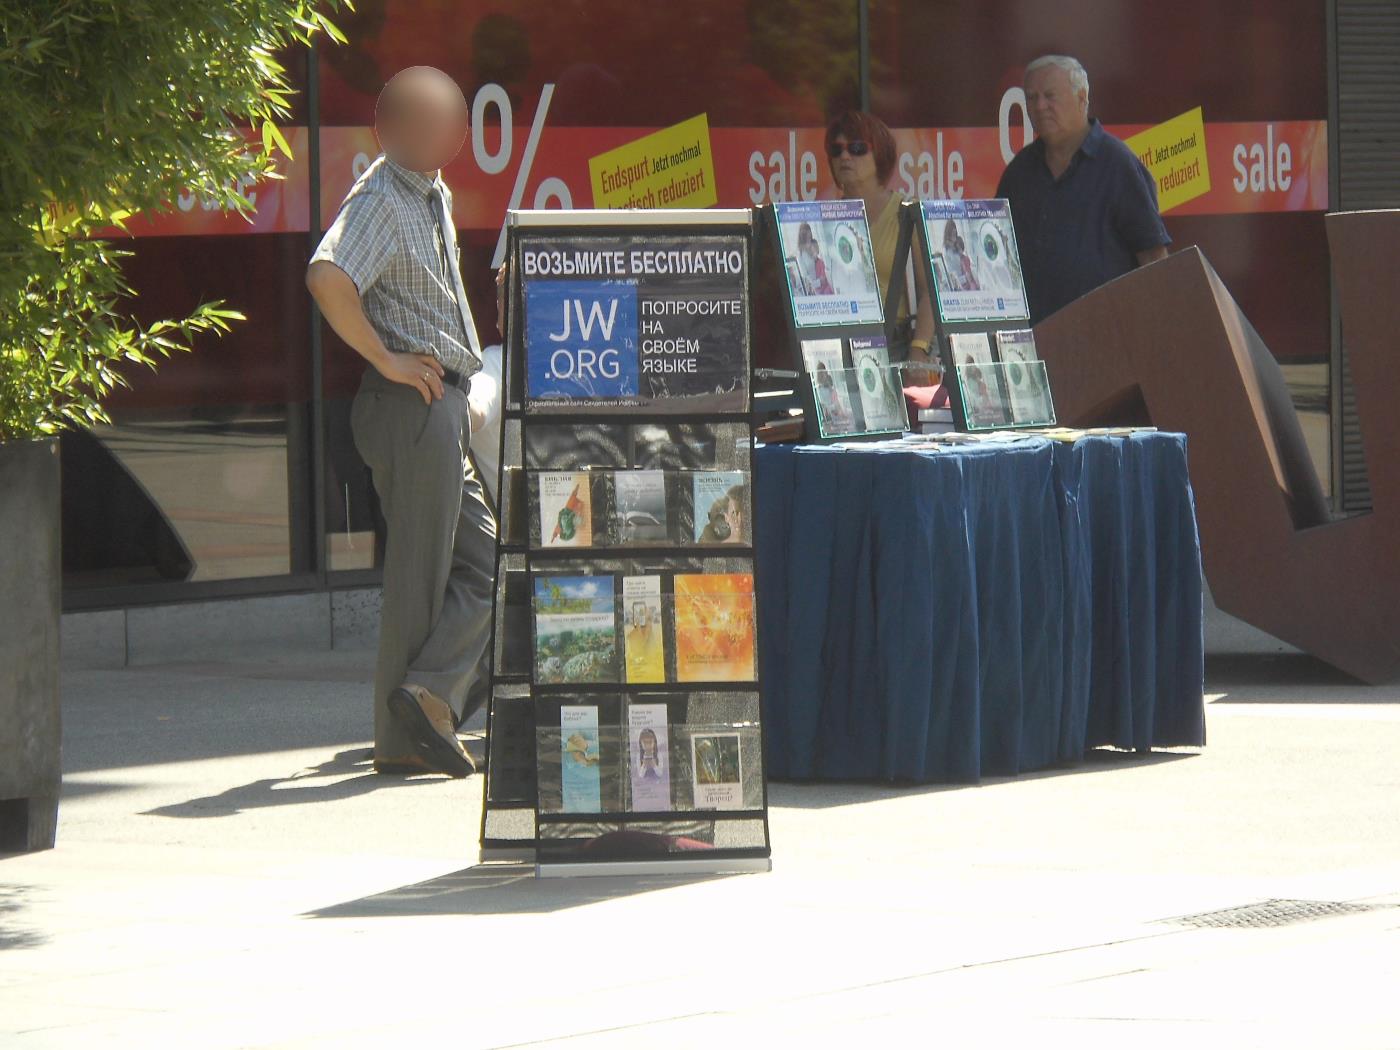 Jehovah's Witnesses stand around Bruchsal. The Show must go on.